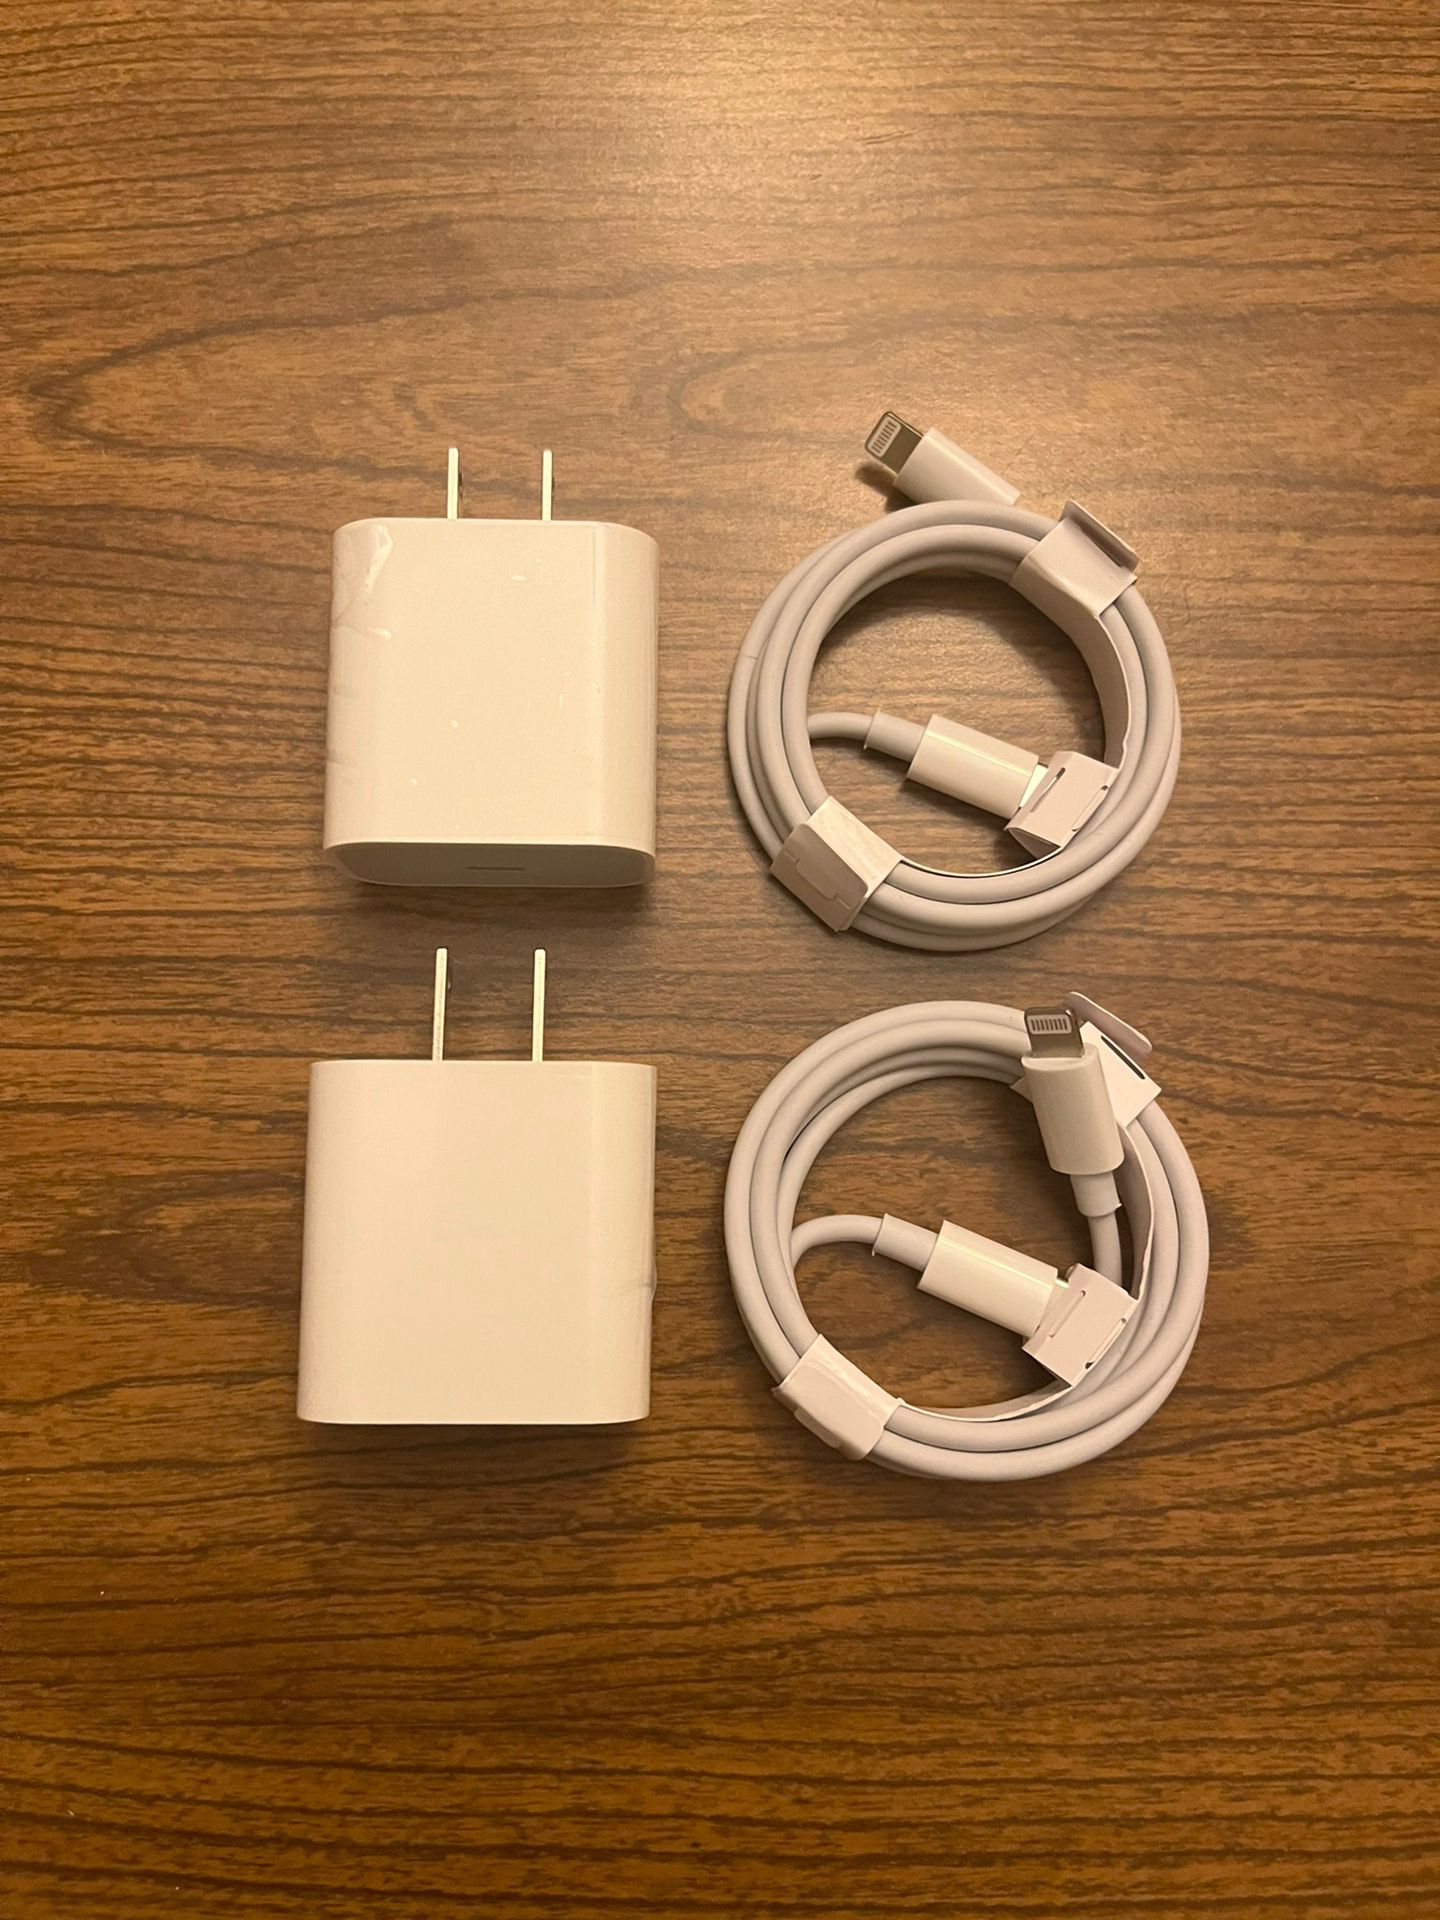 2x IPhone 11/12/13 Pro/X/XR Fast Charger 20W PD Cable Cord Power